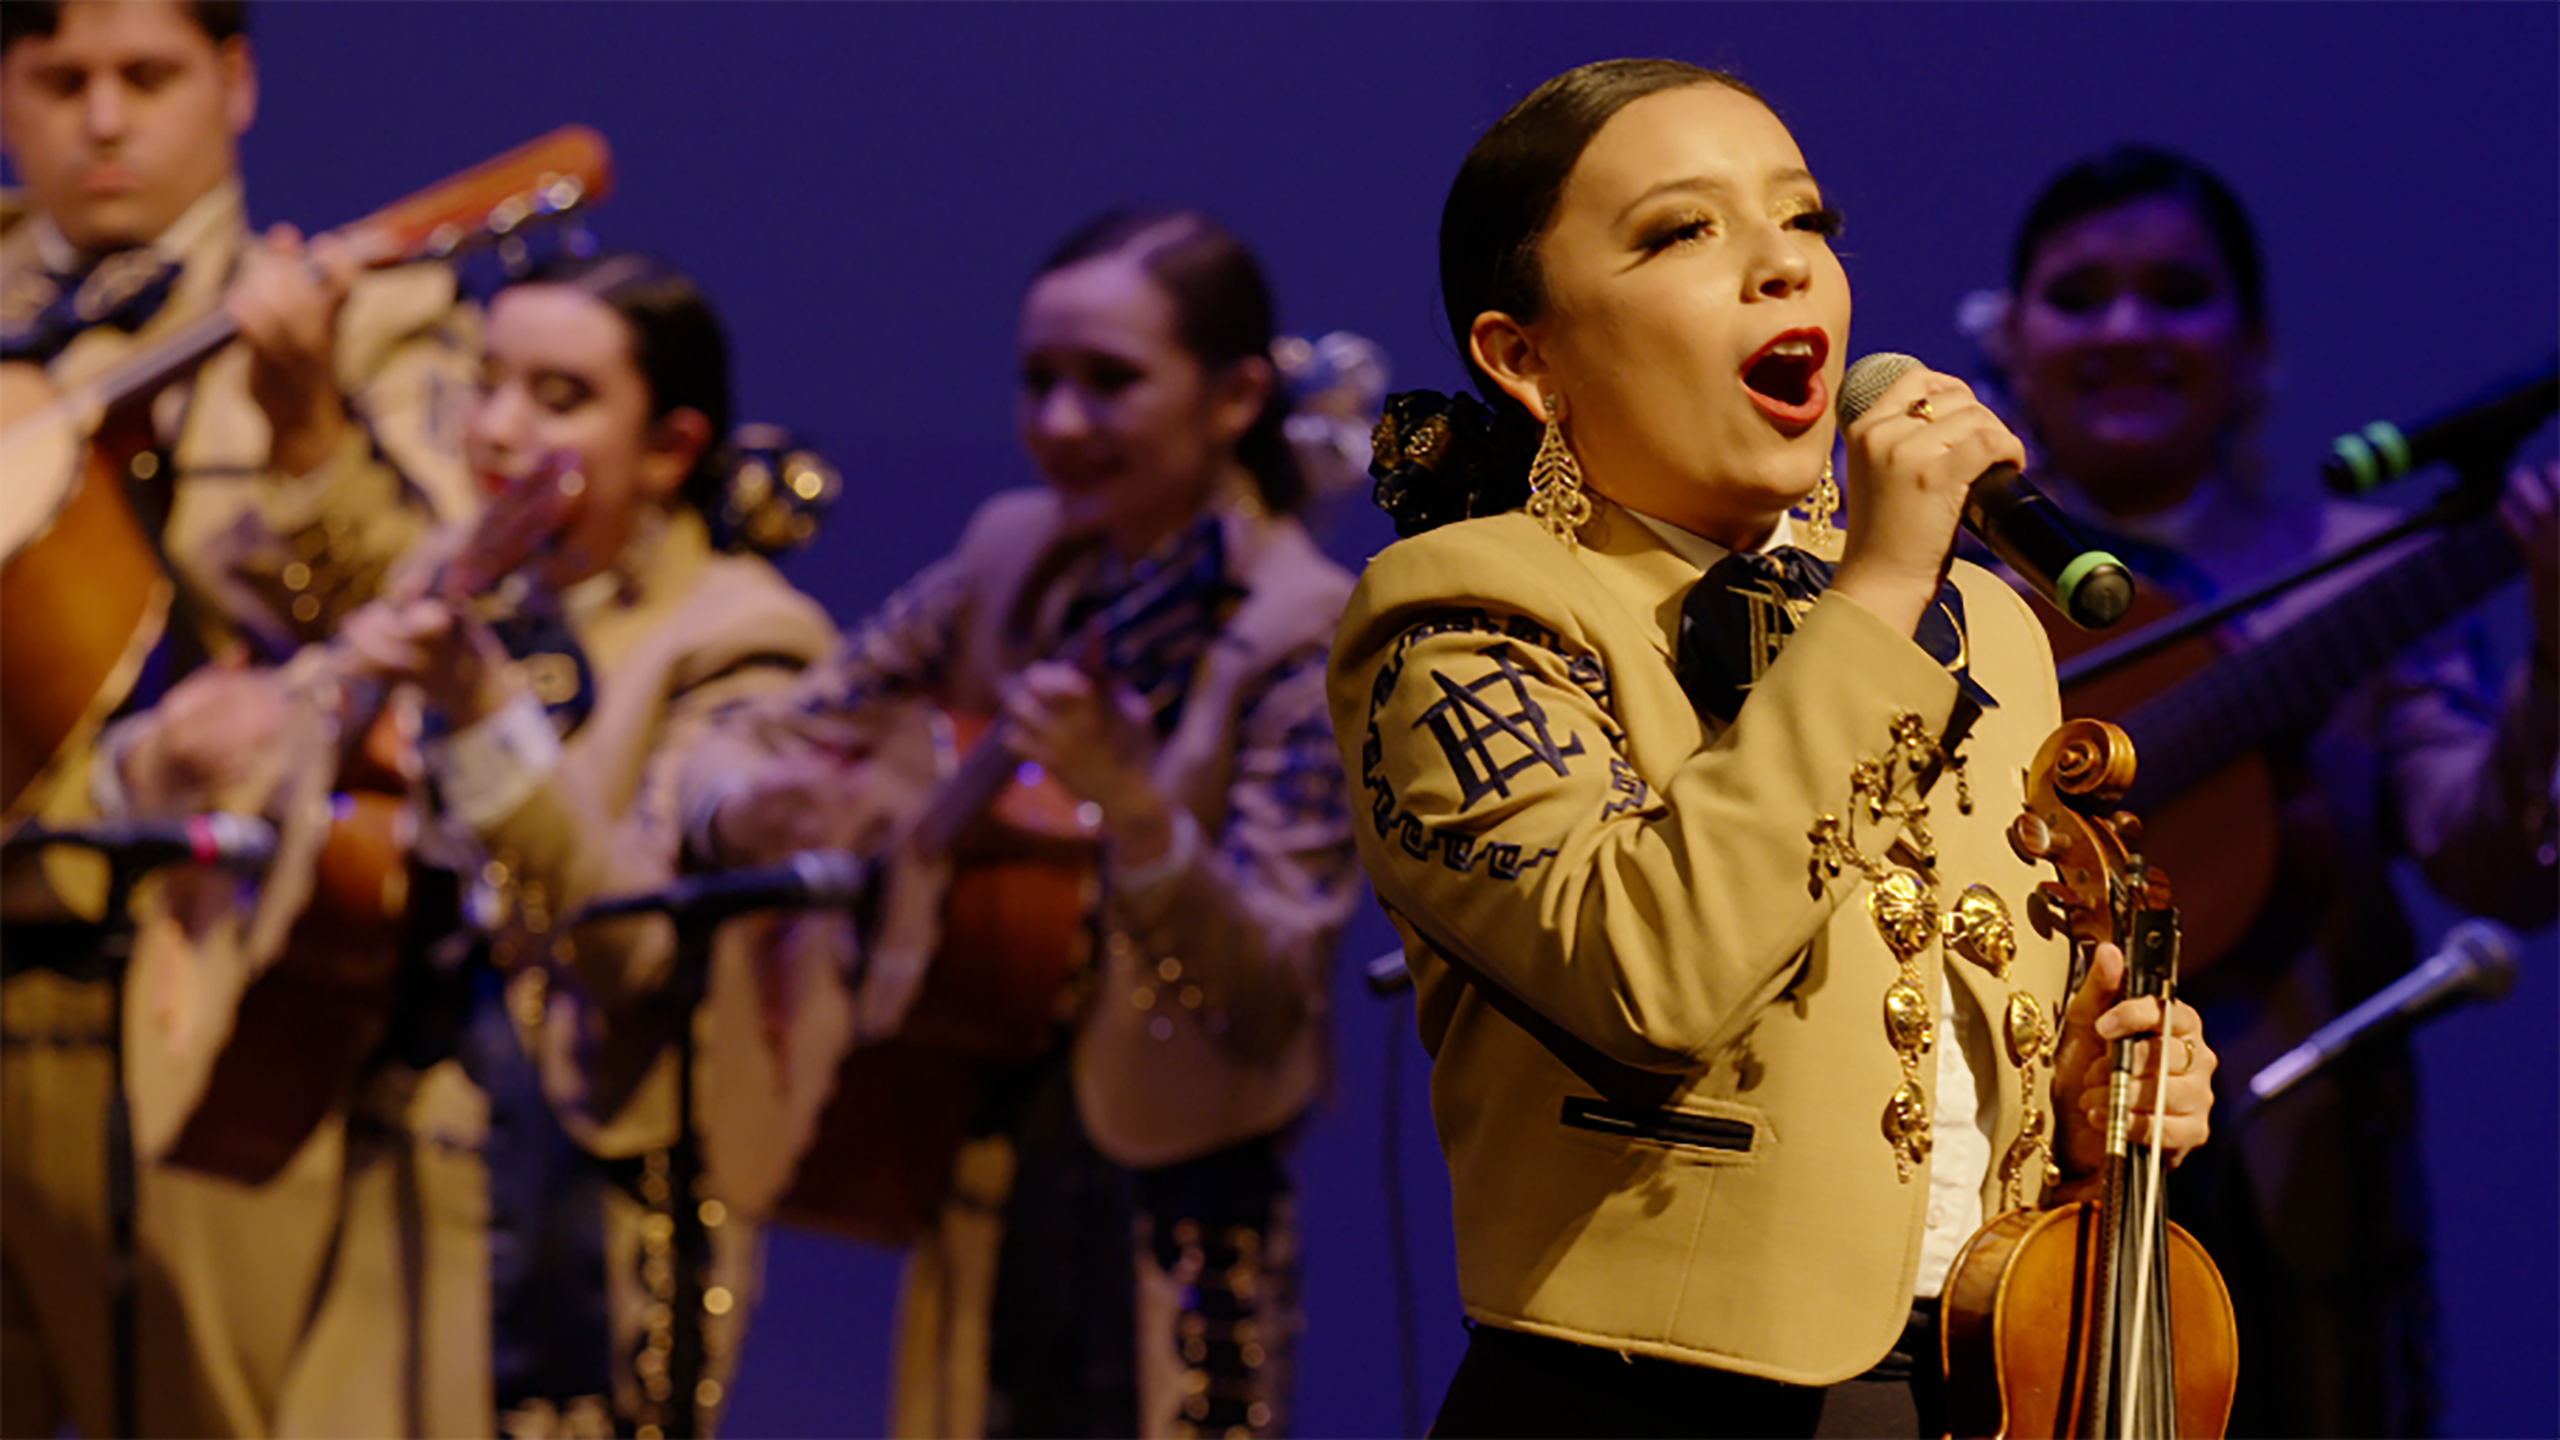 A group of teenage mariachi players performing on stage.